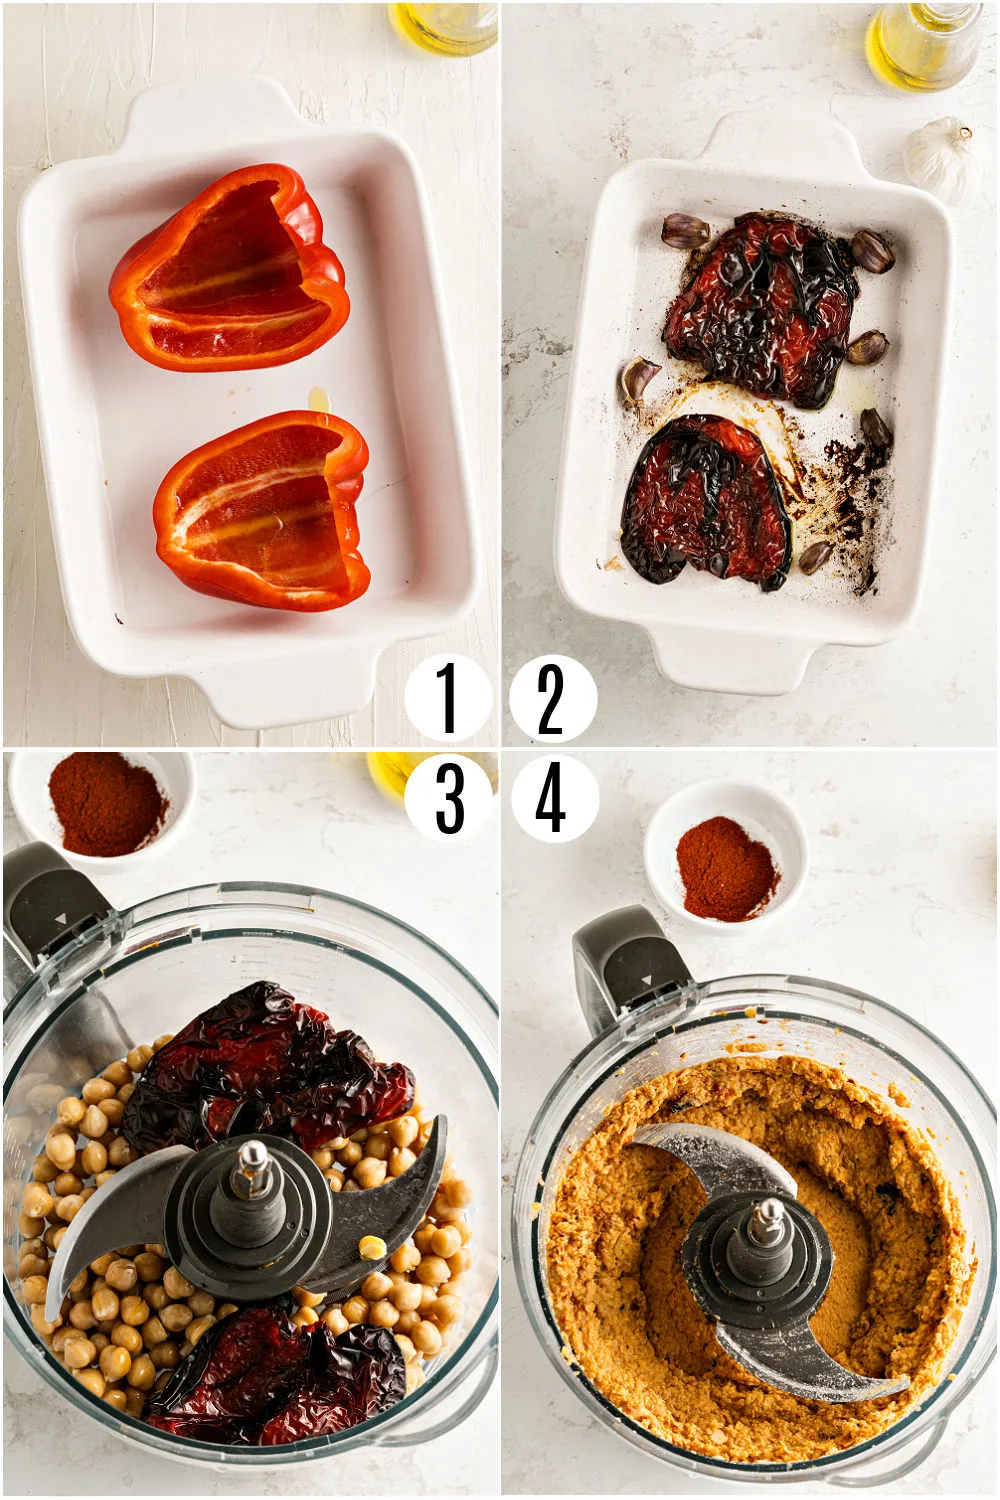 Step by step photos showing how to make chipotle hummus with roasted red peppers.